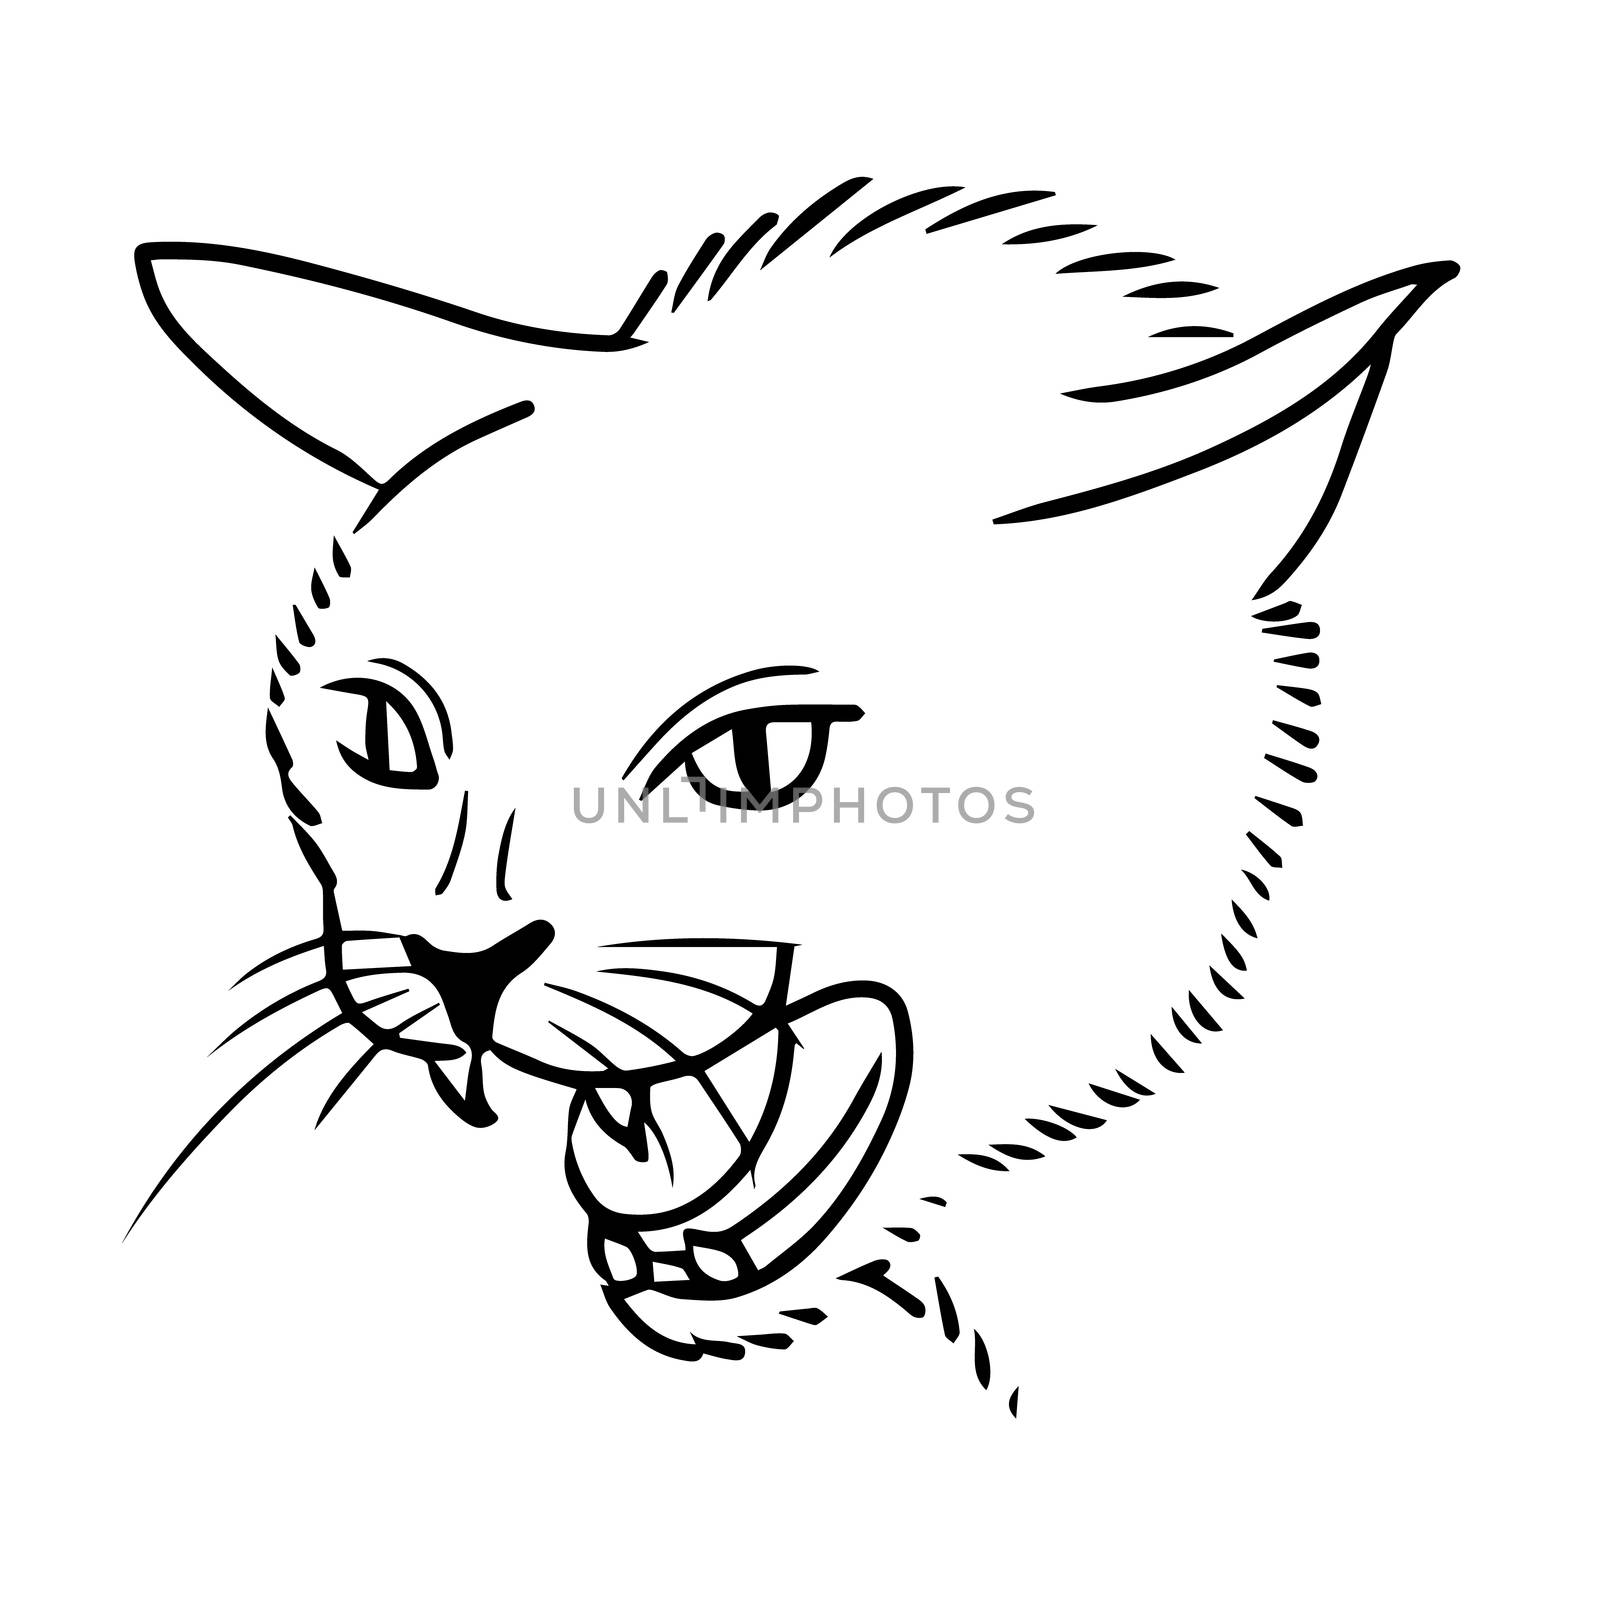 freehand sketch illustration of angry cat, kitten doodle hand drawn